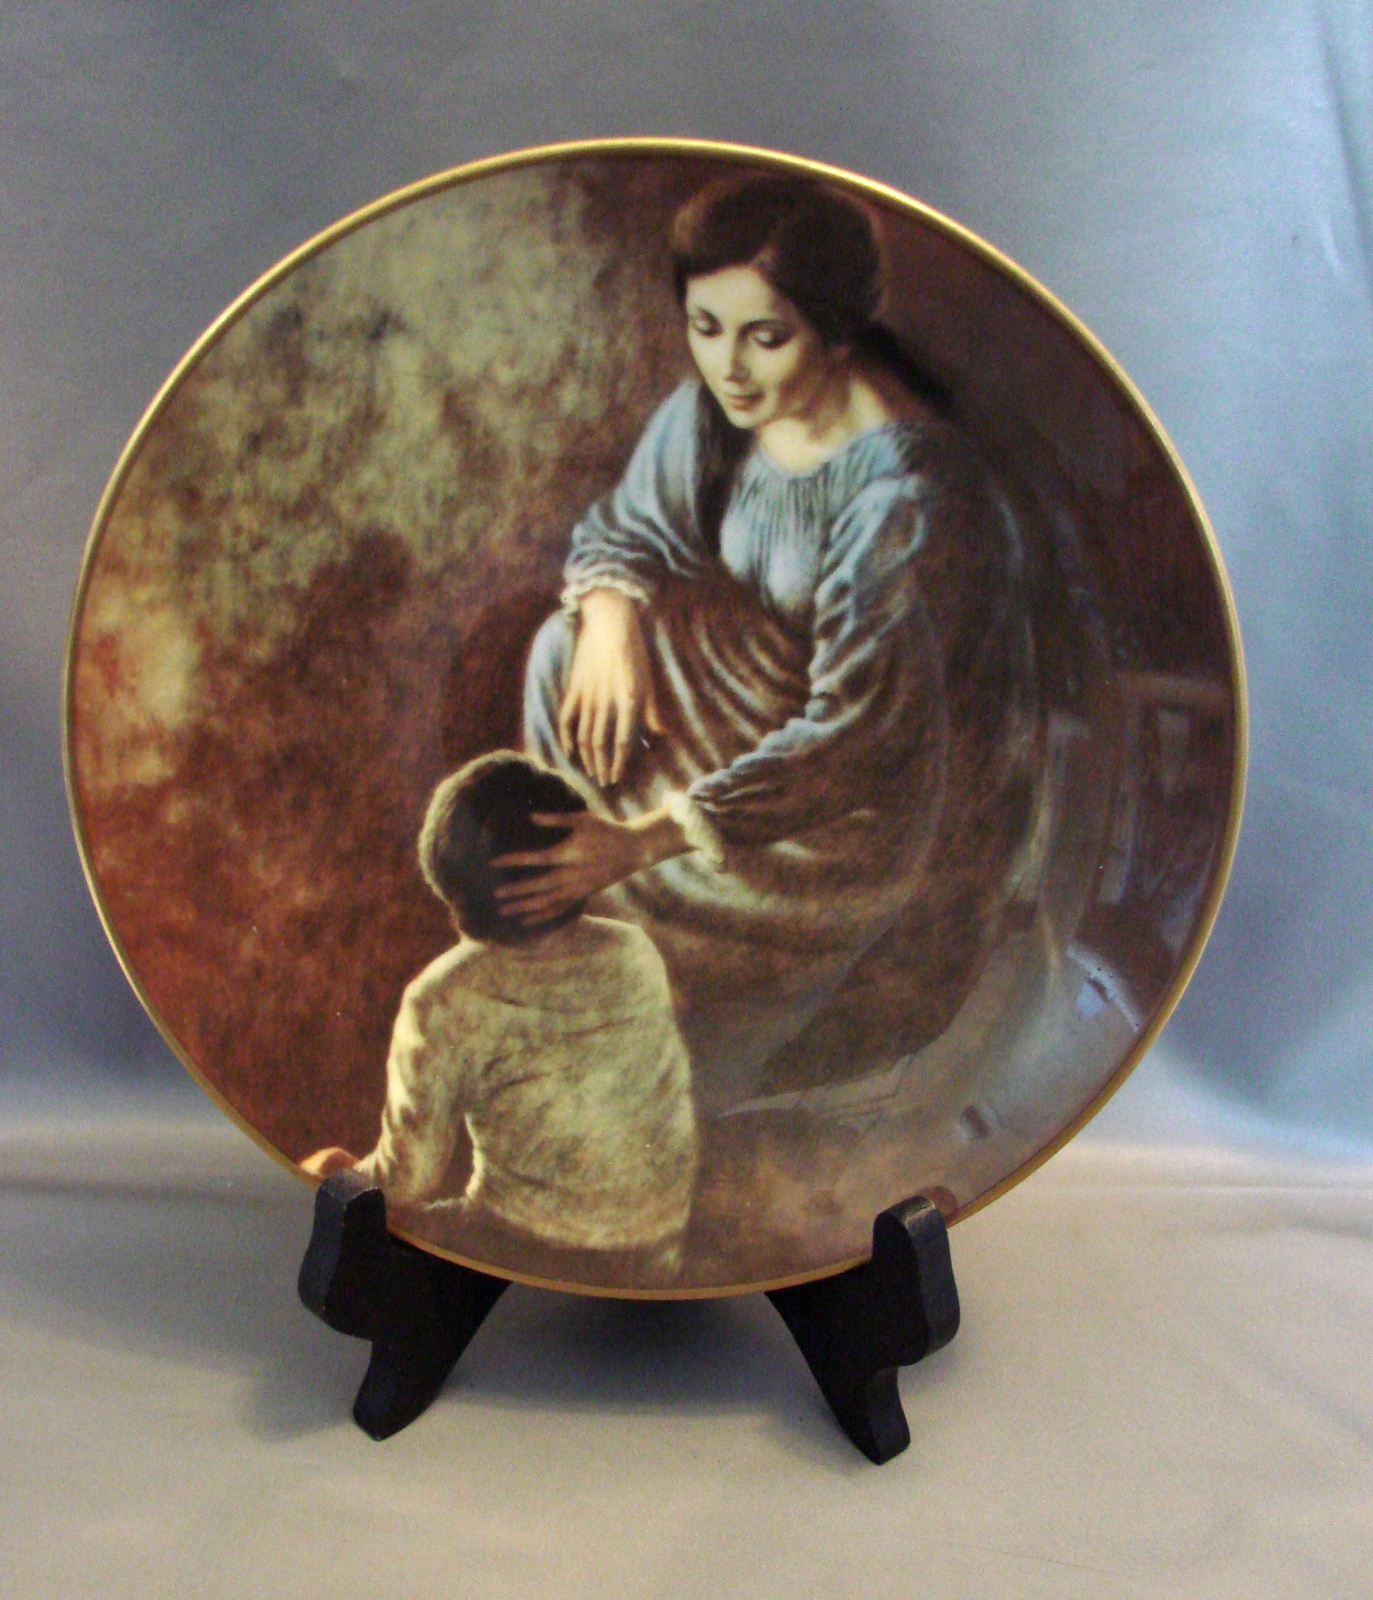 Gorham "Dear Child" 1st Issue Limited Edition Irene Spencer Collector Plate - $10.95